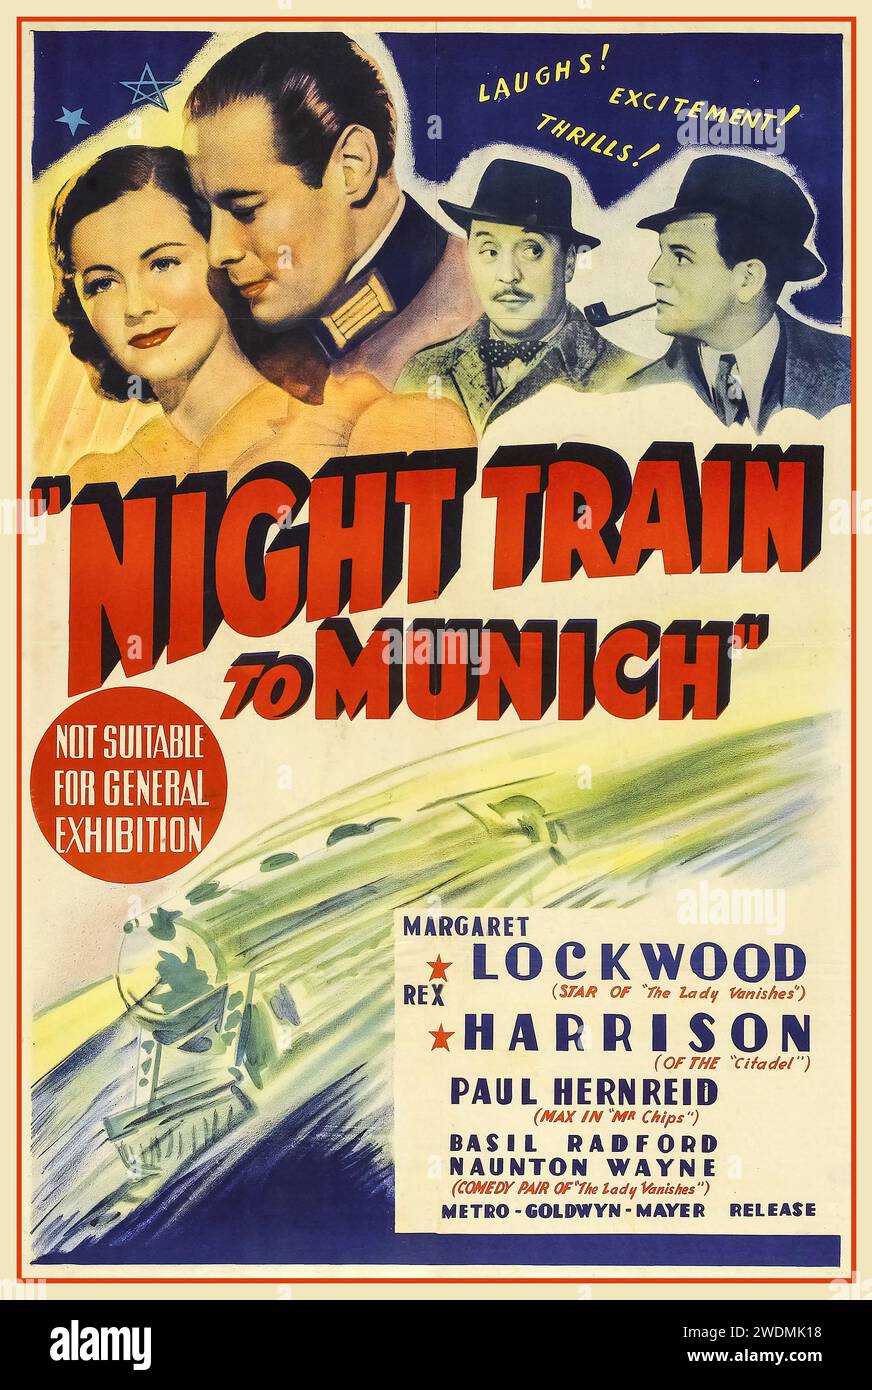 Vintage 1940 Movie Poster 'Night Train to Munich' starring Margaret Lockwood, Rex Harrison, Paul Hernreid, Basil Radford, Naunton Wayne,  Night Train to Munich is a 1940 British thriller film directed by Carol Reed and starring Margaret Lockwood and Rex Harrison. Written by Sidney Gilliat and Frank Launder, based on the 1939 short story Report on a Fugitive by Gordon Wellesley, the film is about an inventor and his daughter who are kidnapped by the Gestapo after the Nazis march into Prague in the prelude to the Second World War. Stock Photo